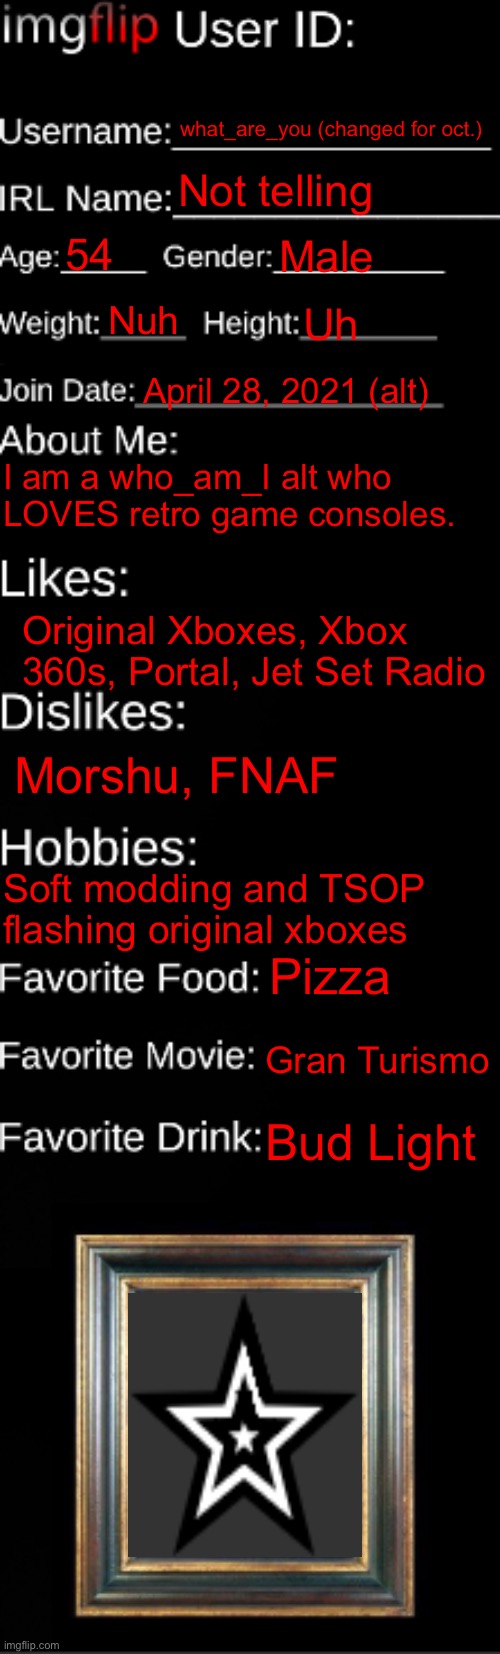 Just did this for fun :P | what_are_you (changed for oct.); Not telling; 54; Male; Nuh; Uh; April 28, 2021 (alt); I am a who_am_I alt who LOVES retro game consoles. Original Xboxes, Xbox 360s, Portal, Jet Set Radio; Morshu, FNAF; Soft modding and TSOP flashing original xboxes; Pizza; Gran Turismo; Bud Light | image tagged in imgflip id card | made w/ Imgflip meme maker